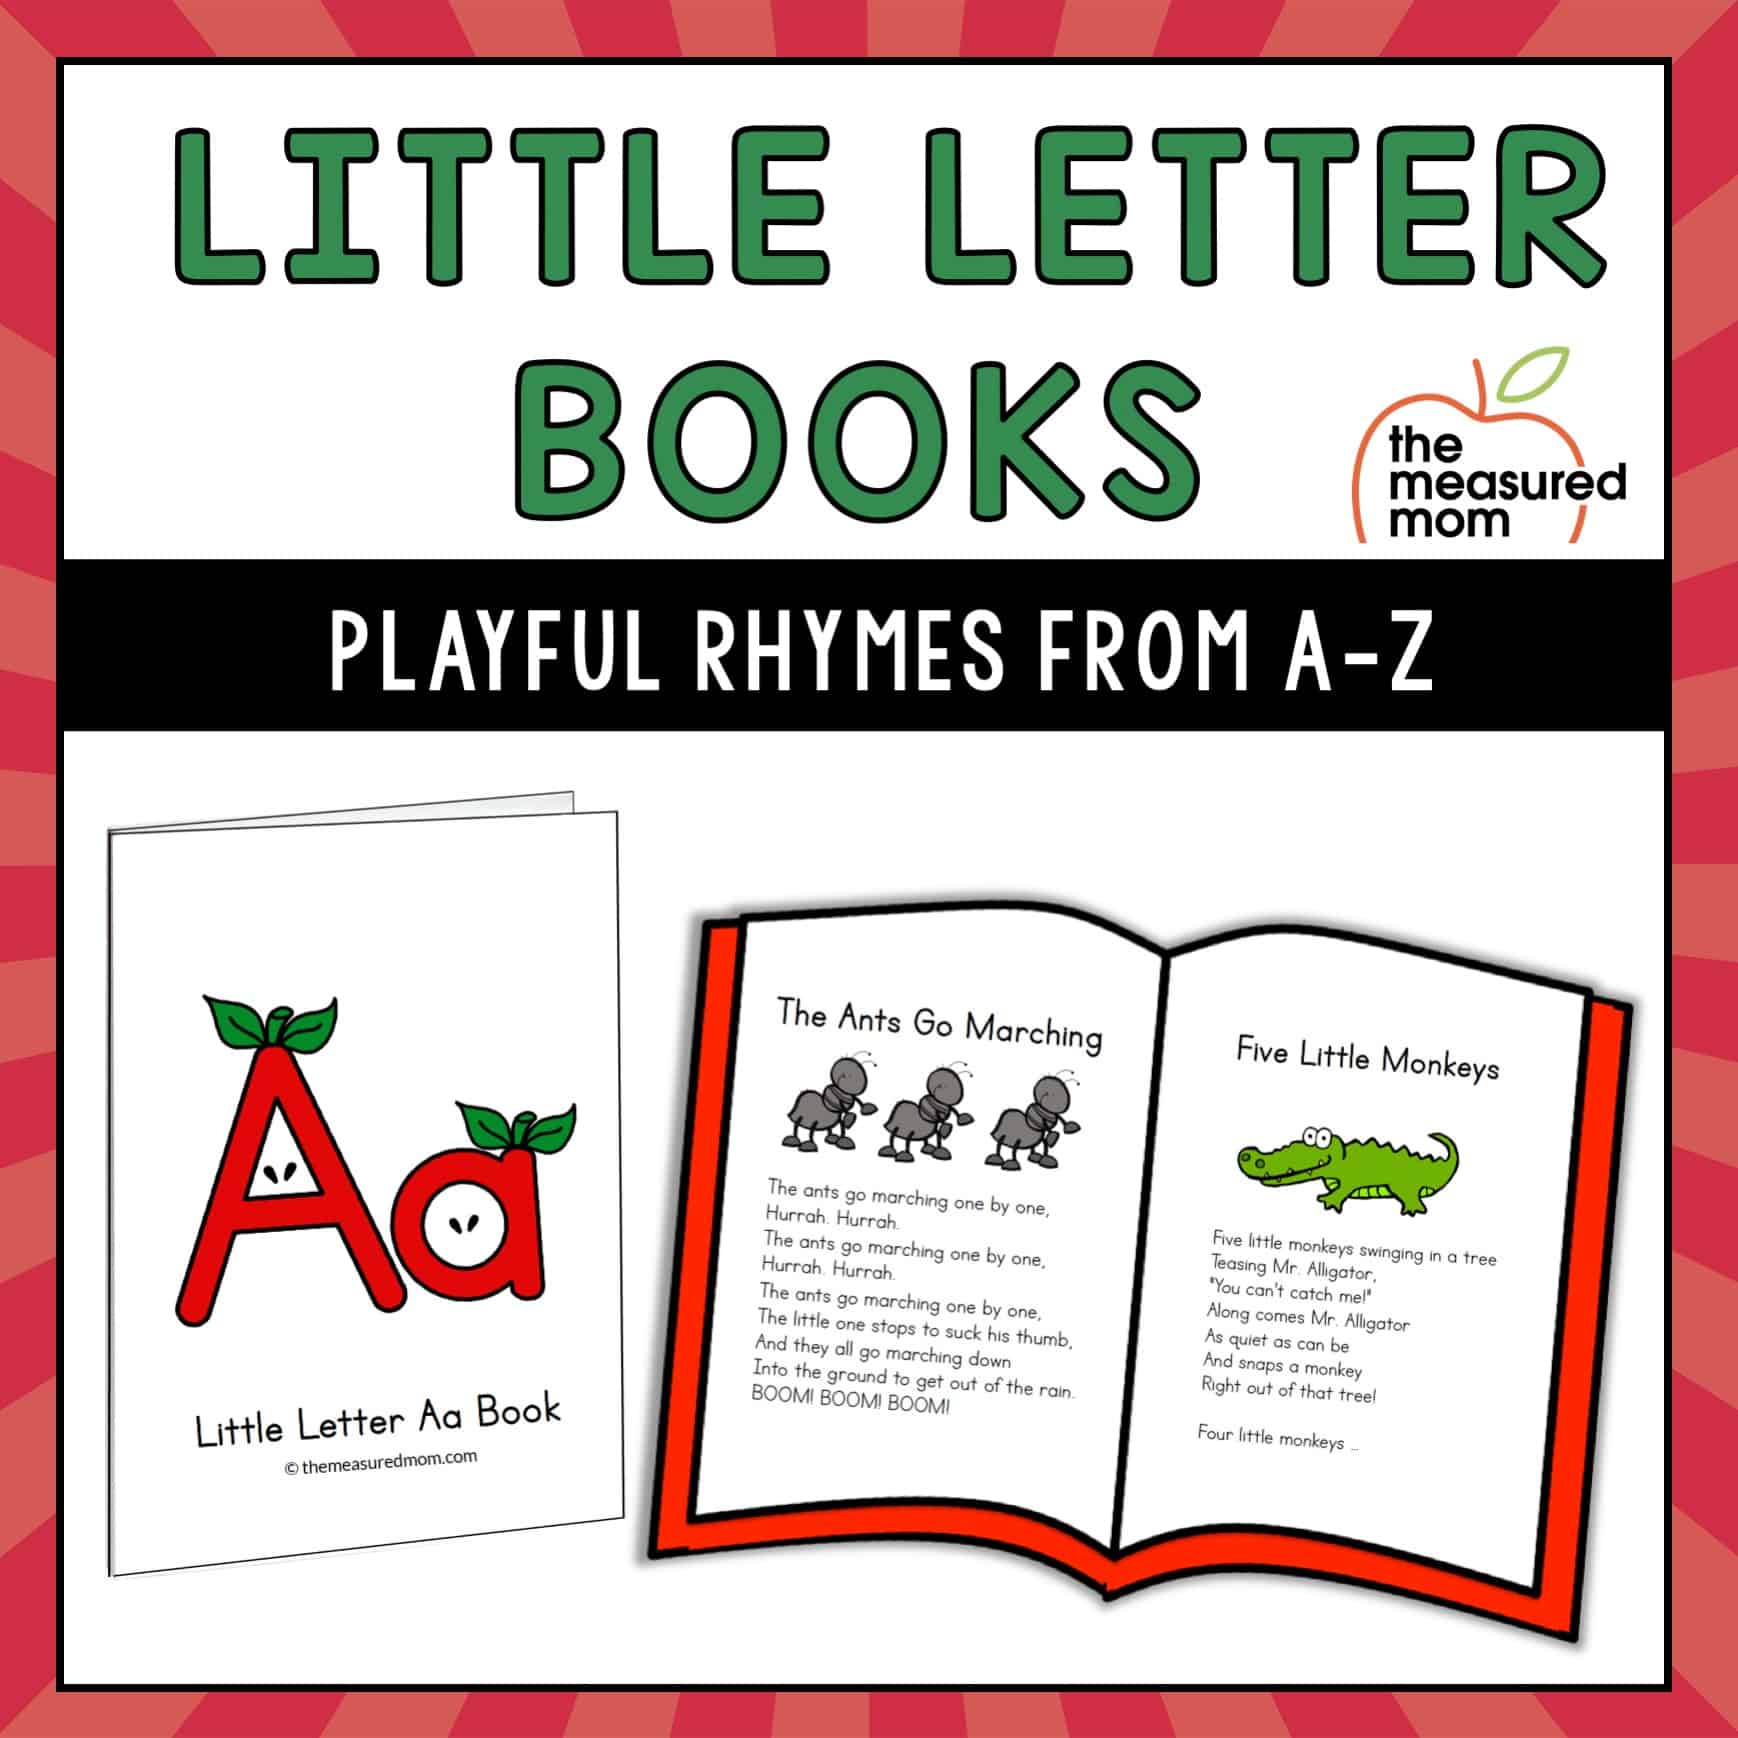 Songs　Rhymes　26　of　Nursery　Books　Letter　Mom　The　Measured